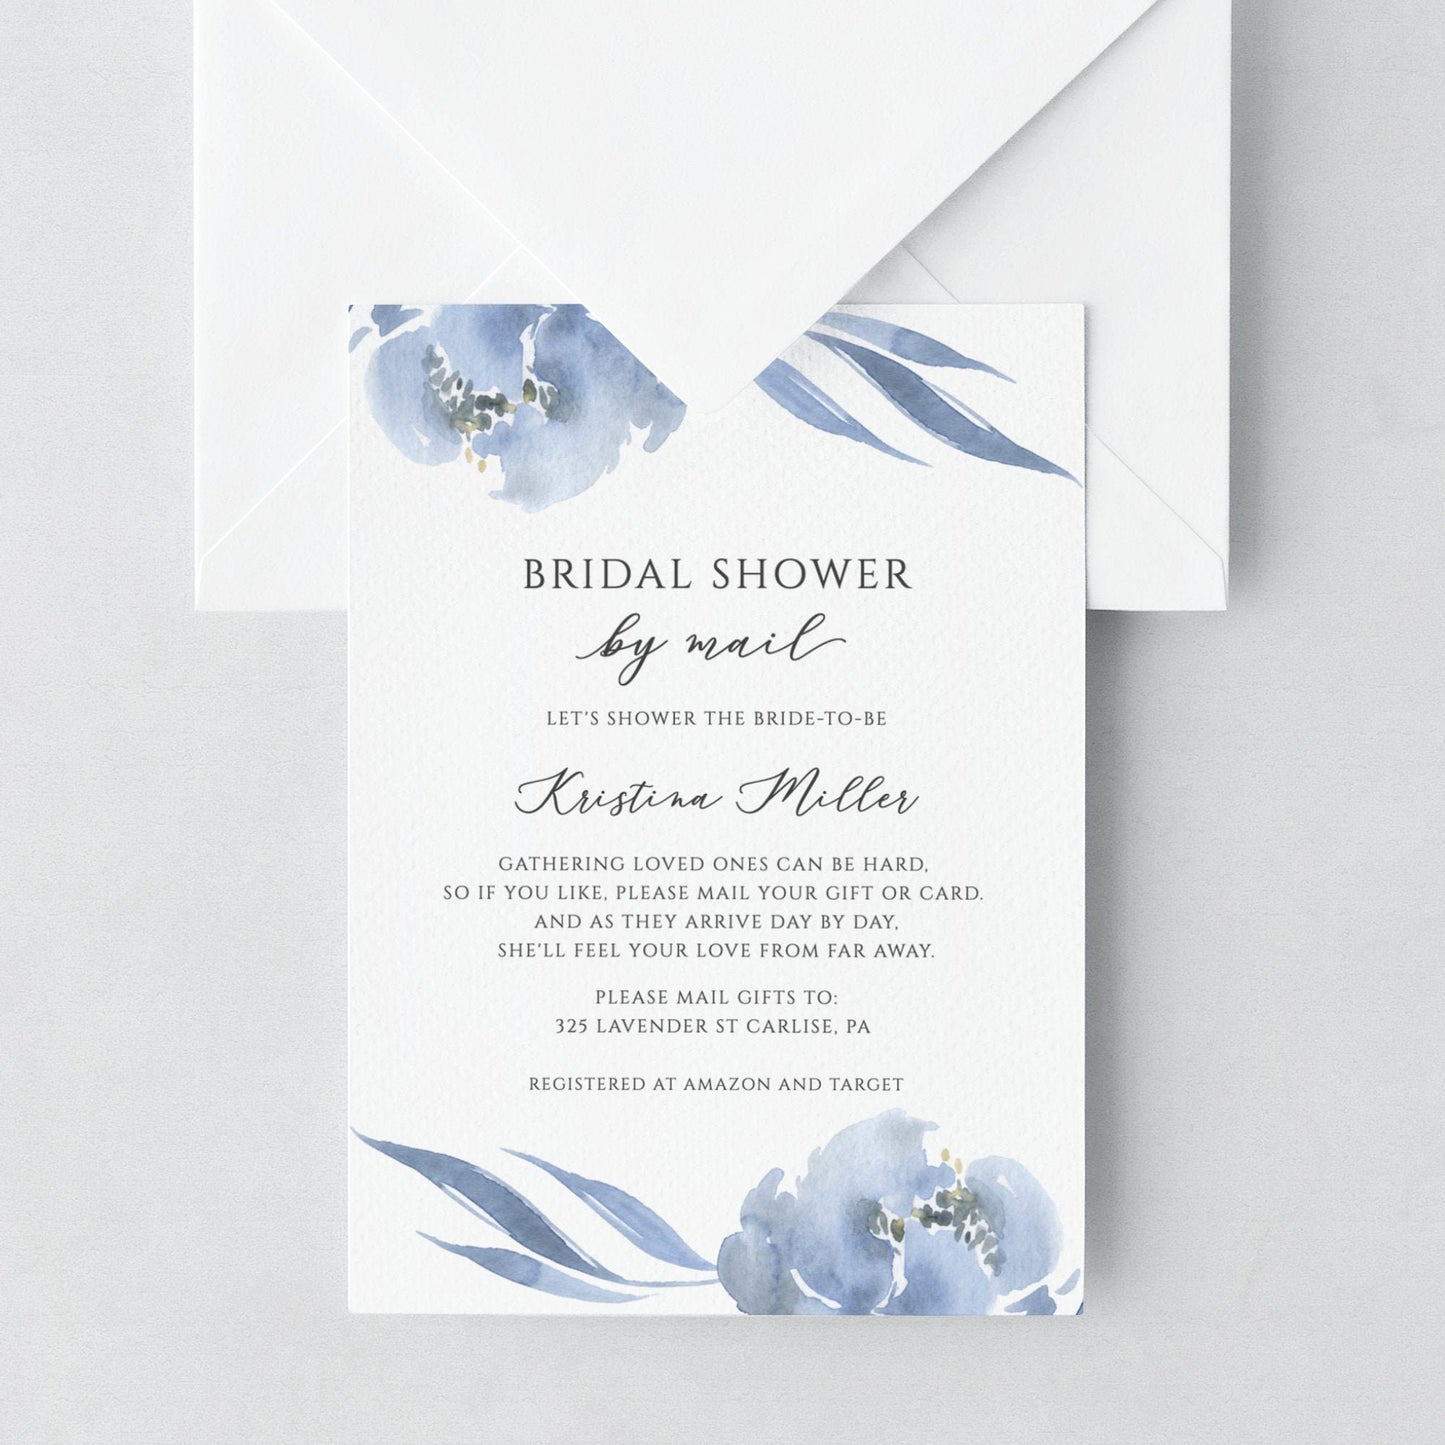 Editable Bridal Shower by Mail Invitation Dusty Blue Floral Social Distance Bridal Shower Invite Template